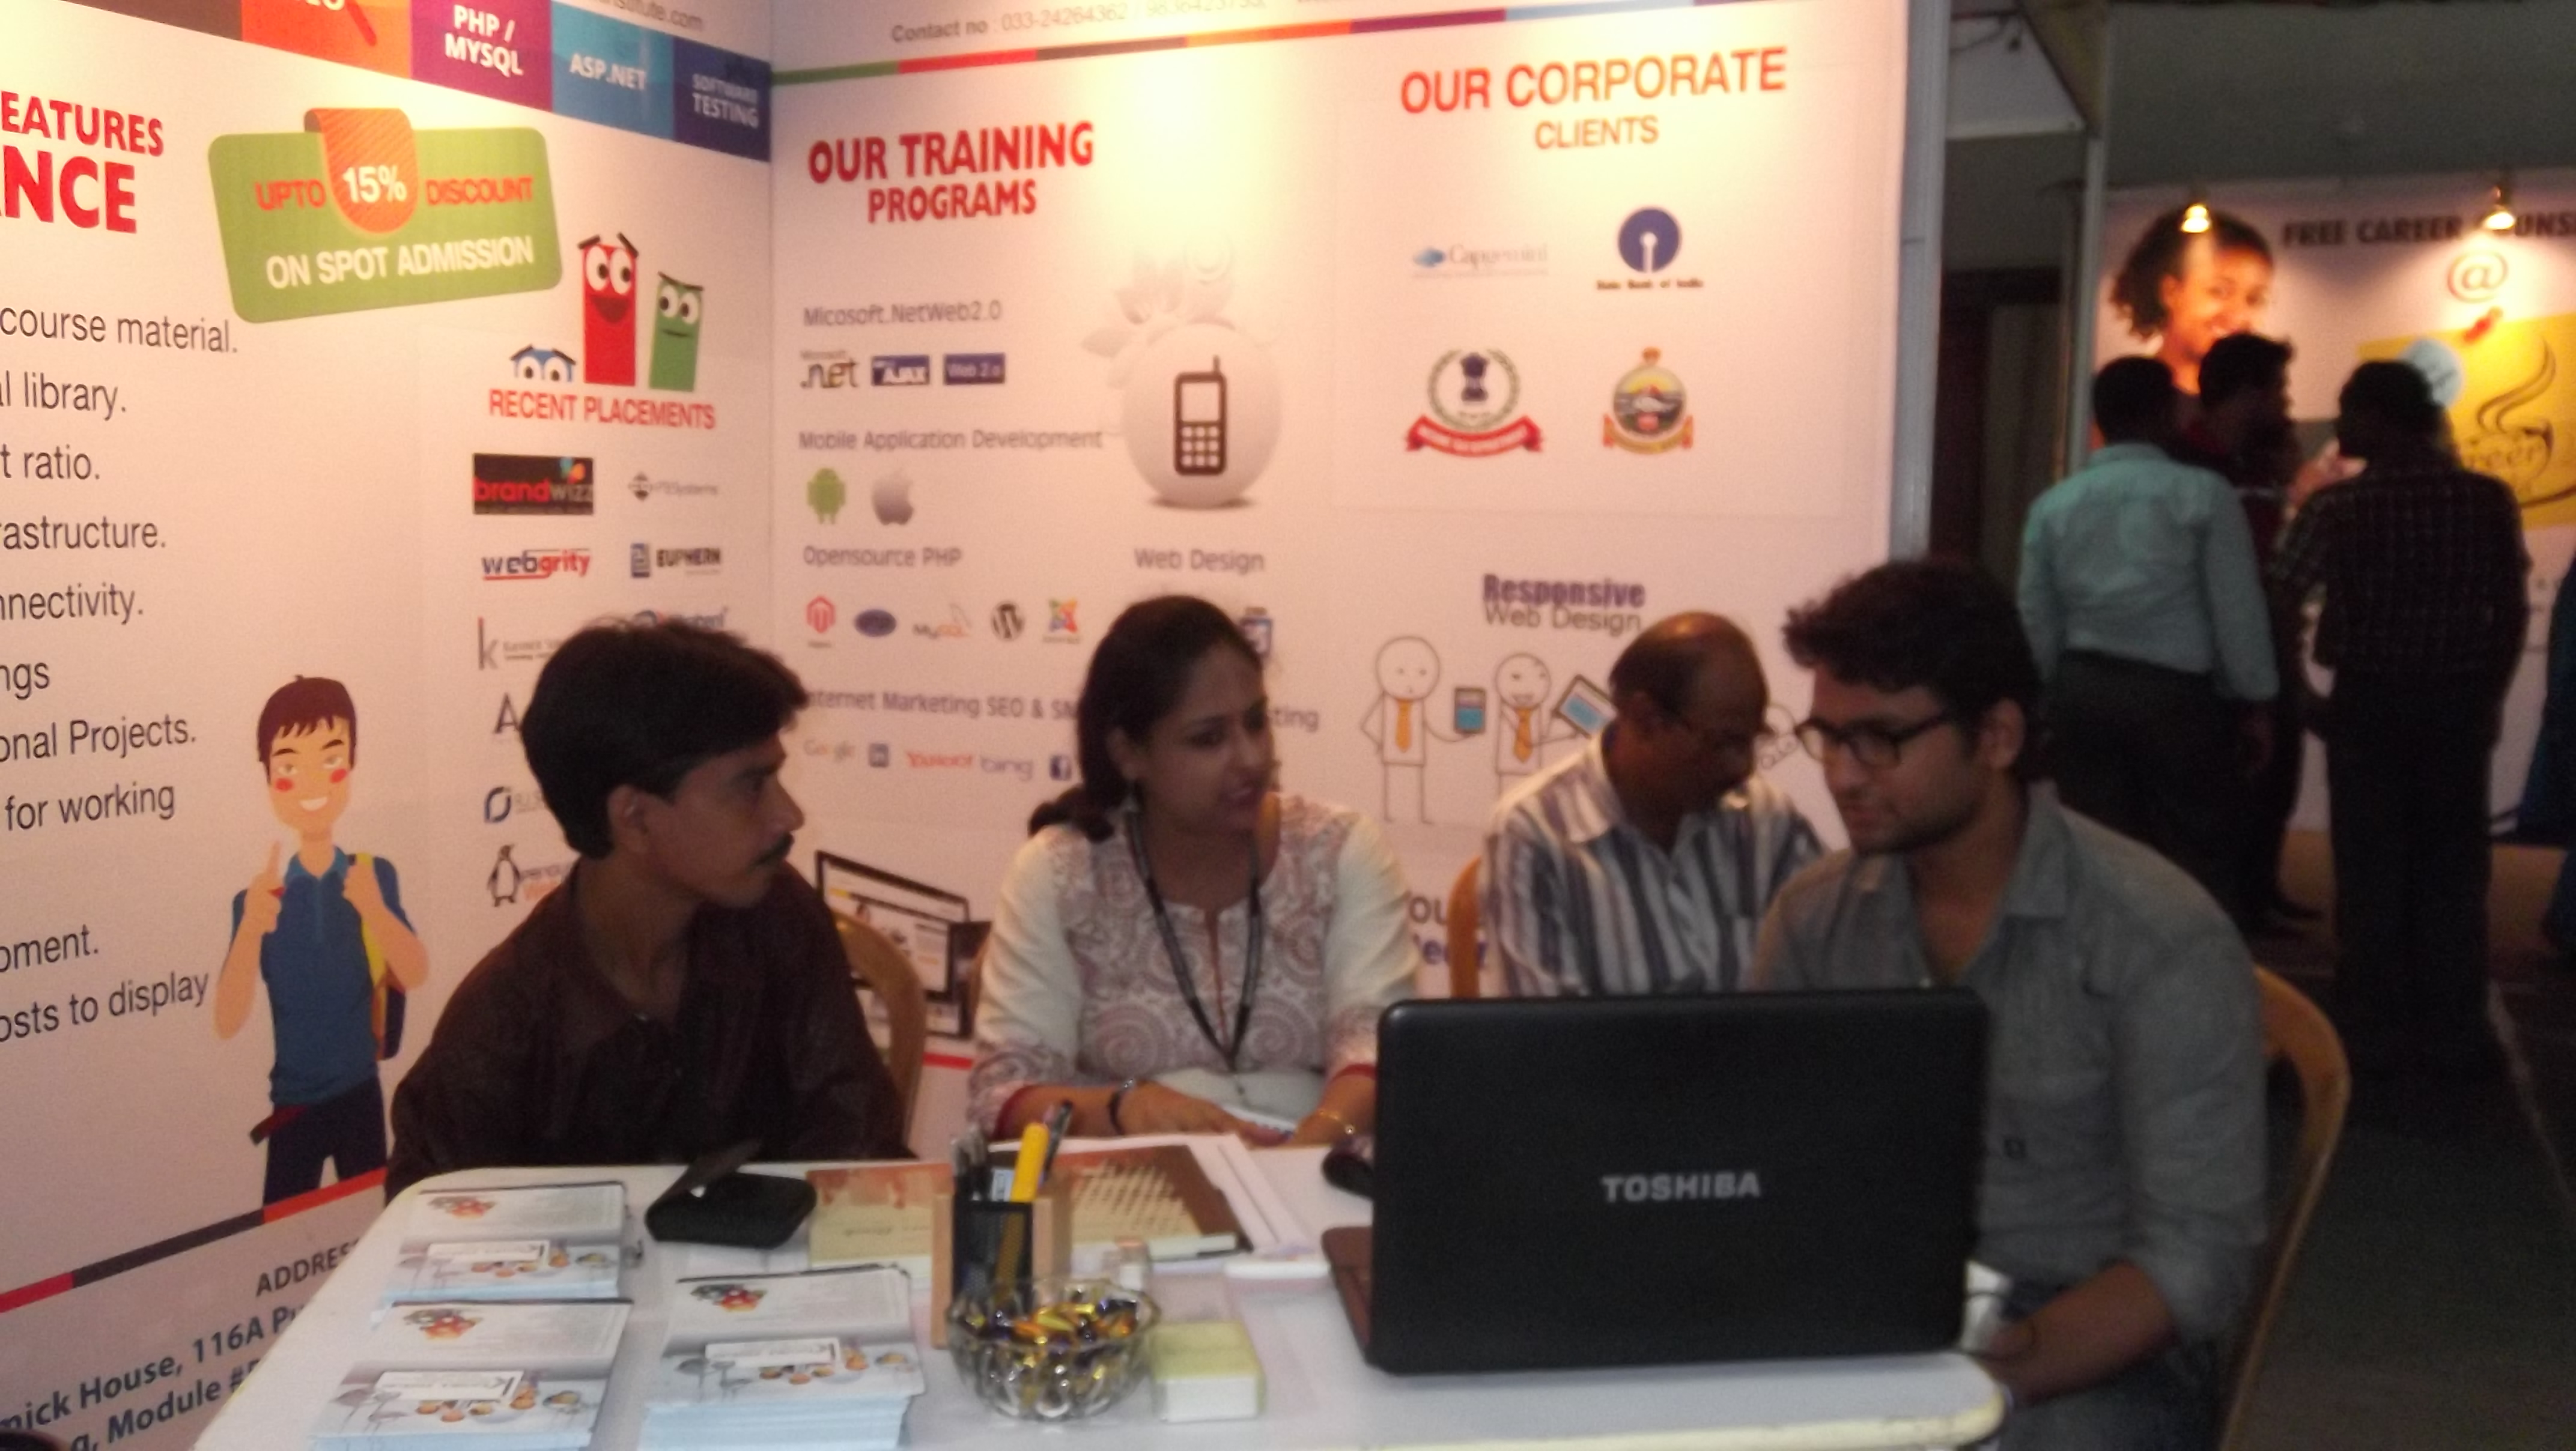 Karmick Institute – a major attraction at the Indian Admission Fair held @ Ice Skating Rink, Kolkata from 20 to 22nd May 2014